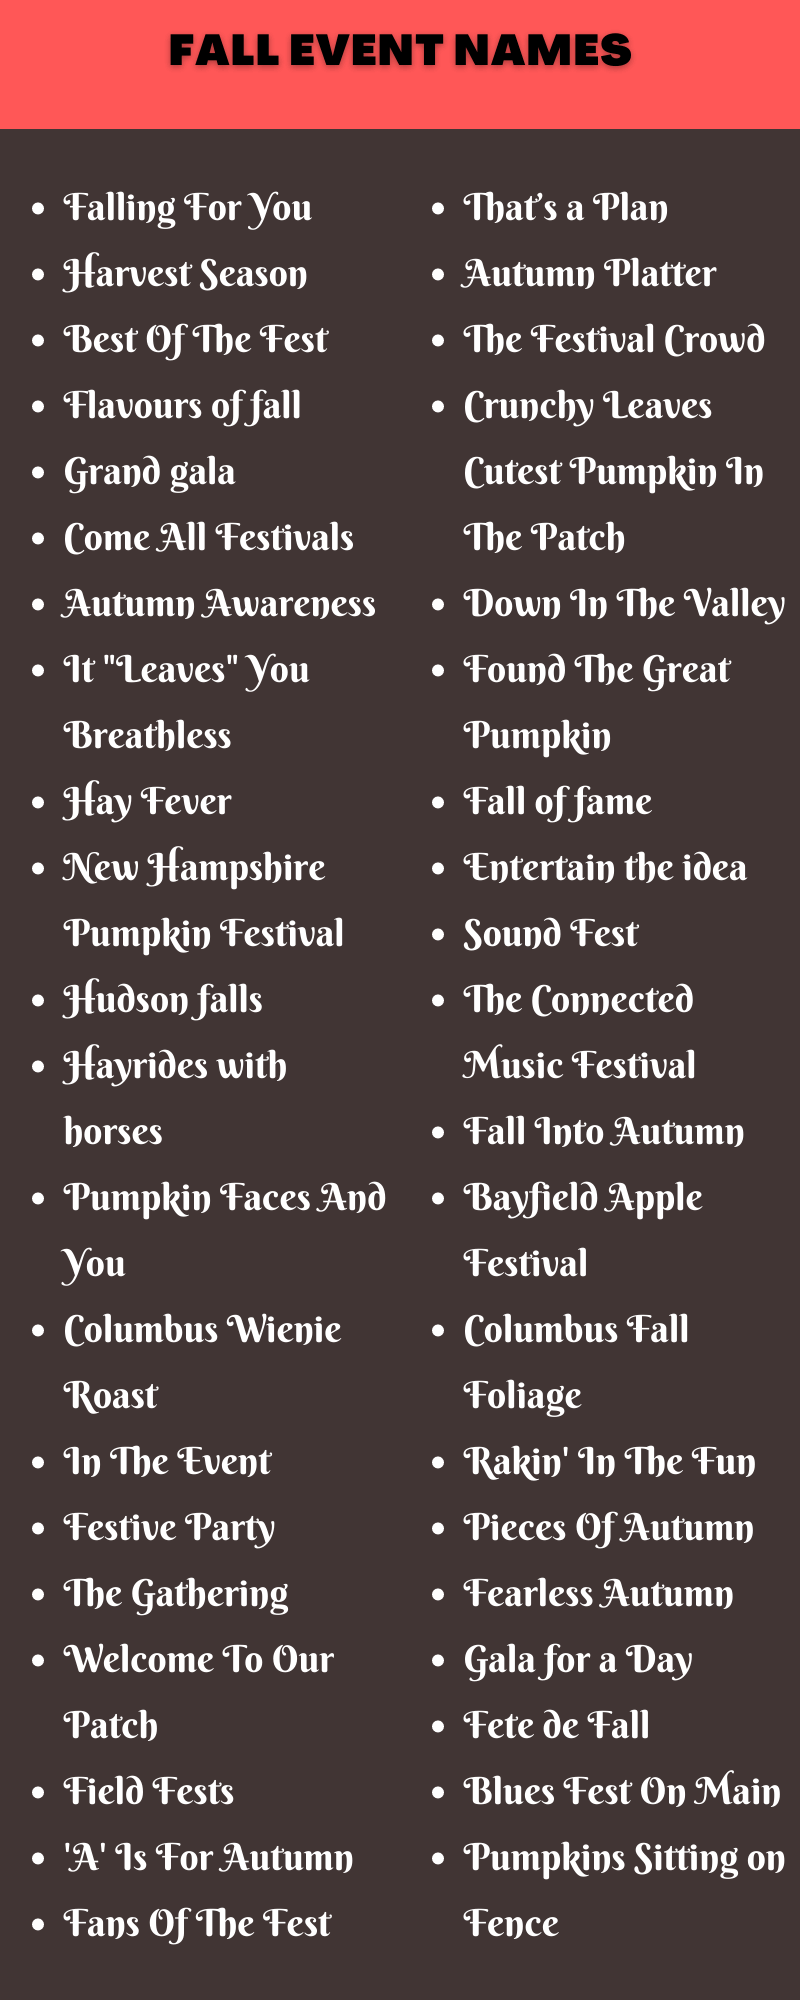 Fall Event Names